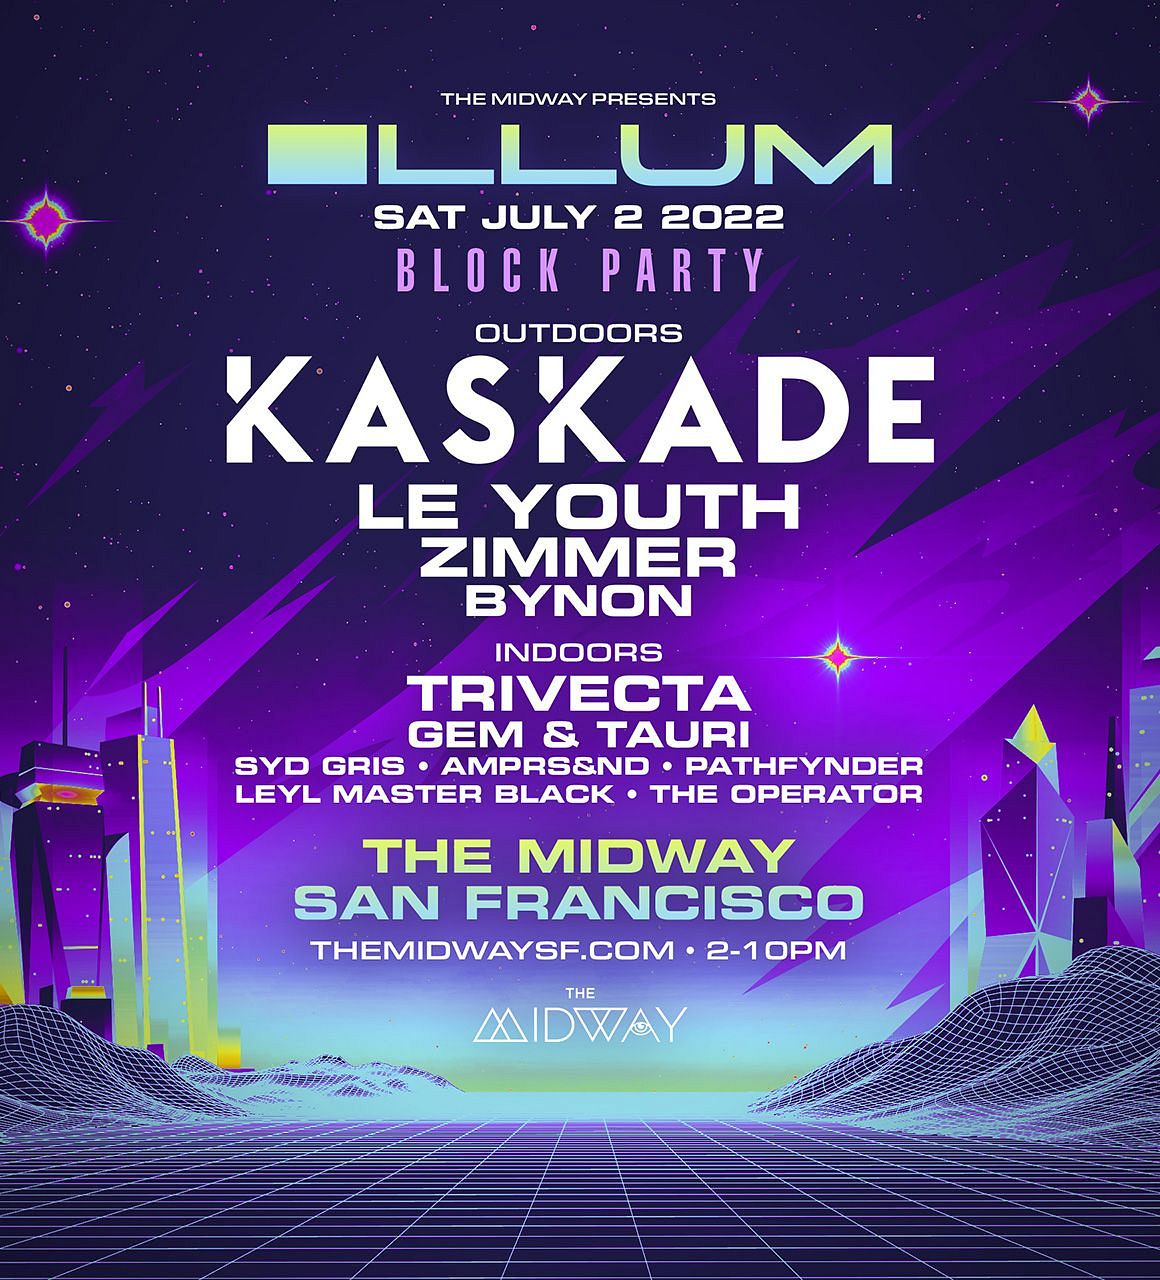 illum Kaskade Block Party Tickets at The Midway in San Francisco by